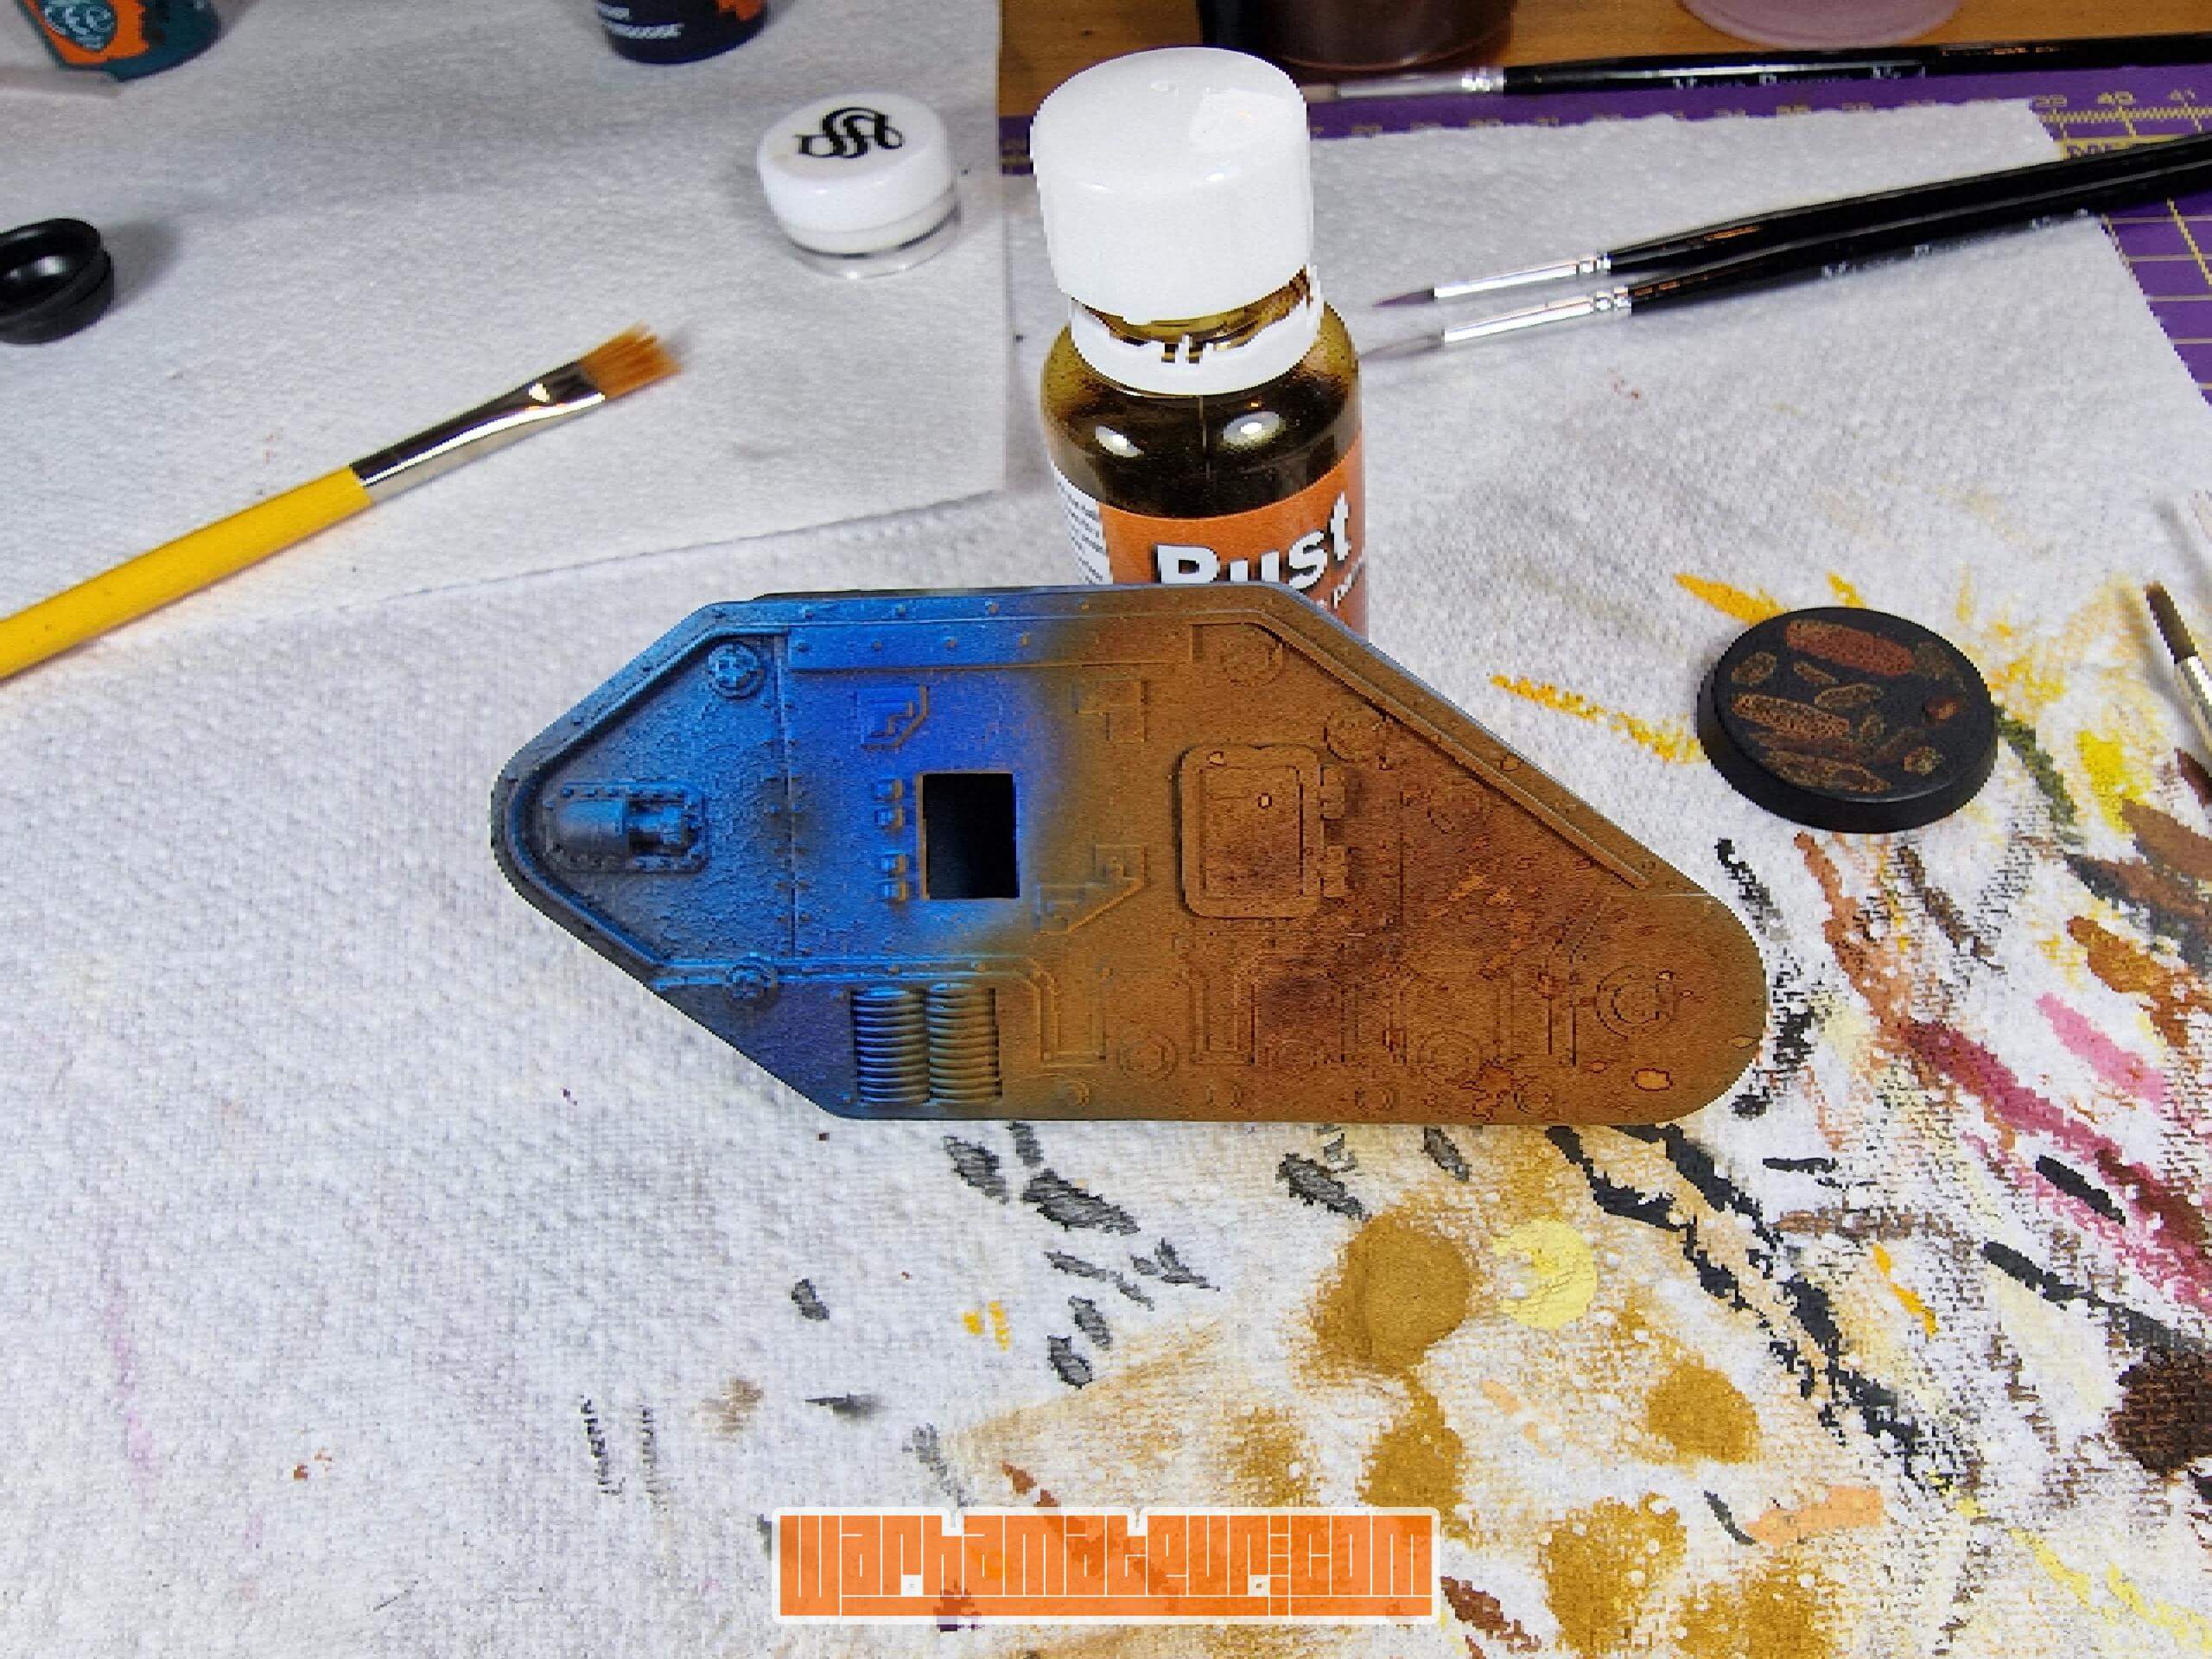 Review: Dirty Down Rust Effects paint – brush and airbrush